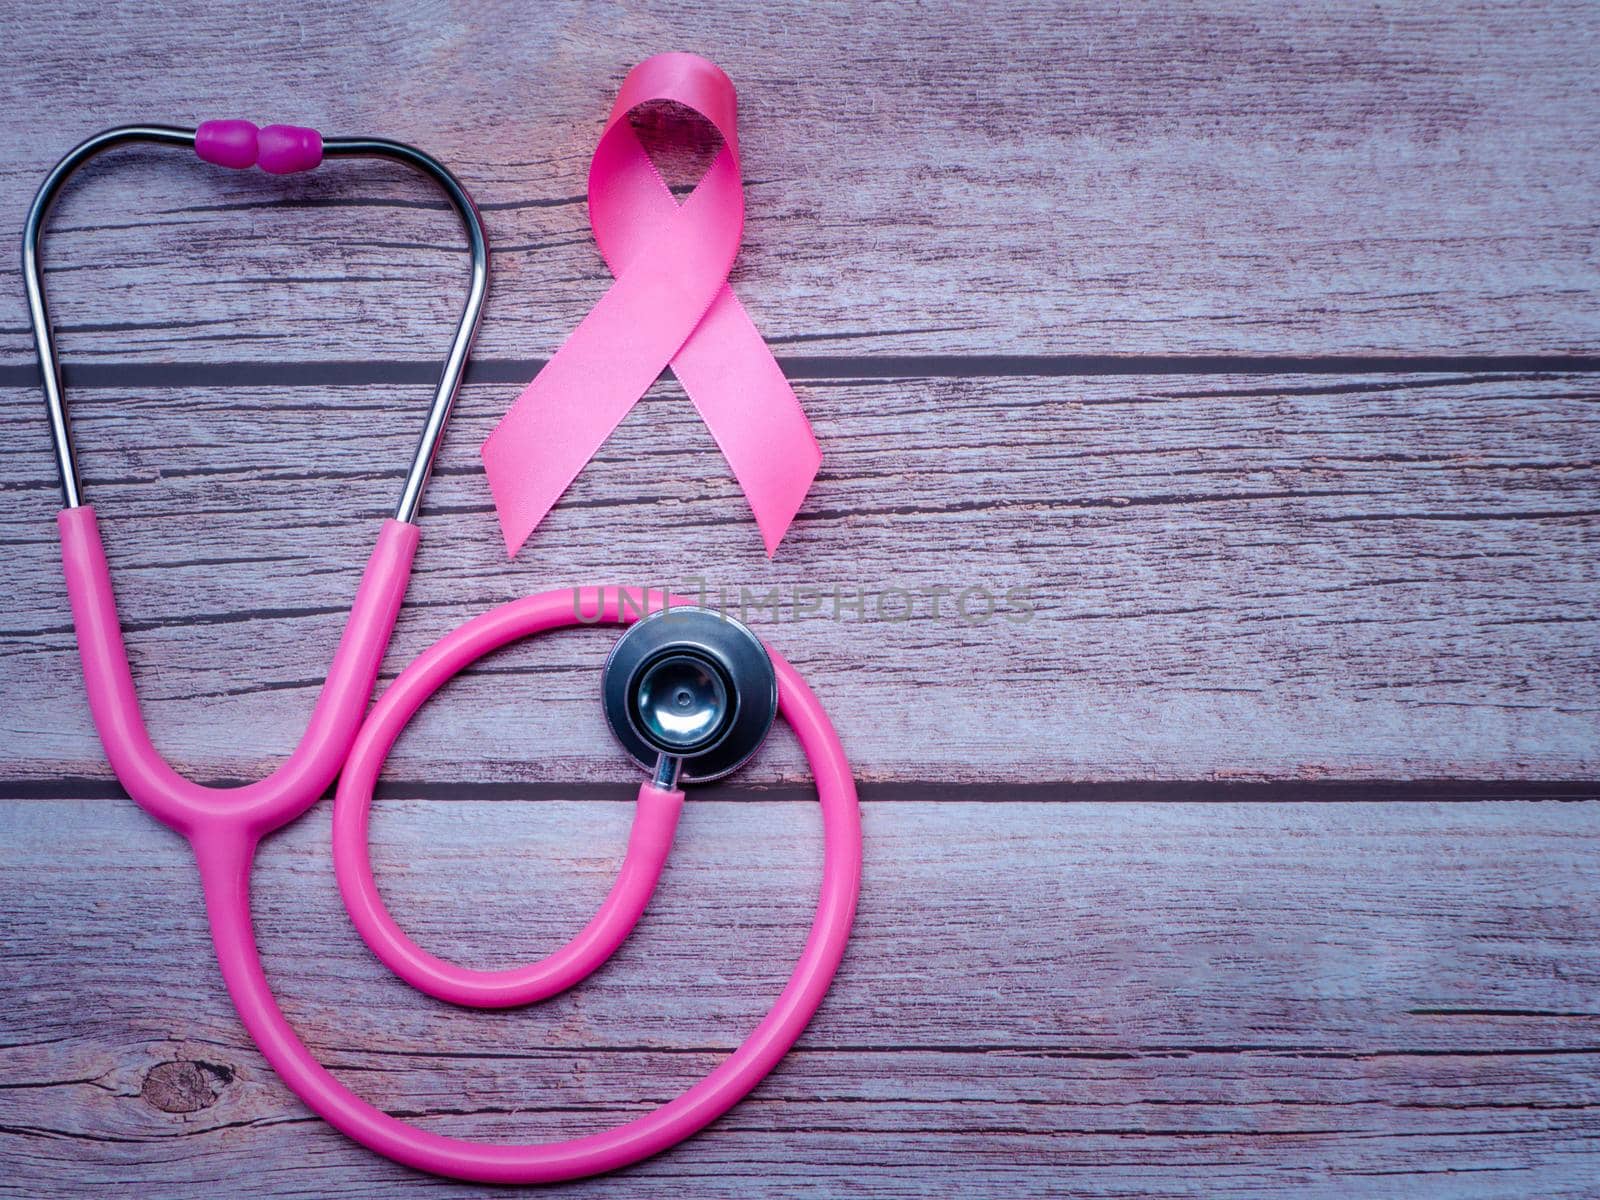 Pink ribbon and stethoscope on wooden table vintage style. Symbol of breast cancer, health care concept by Chakreeyarut